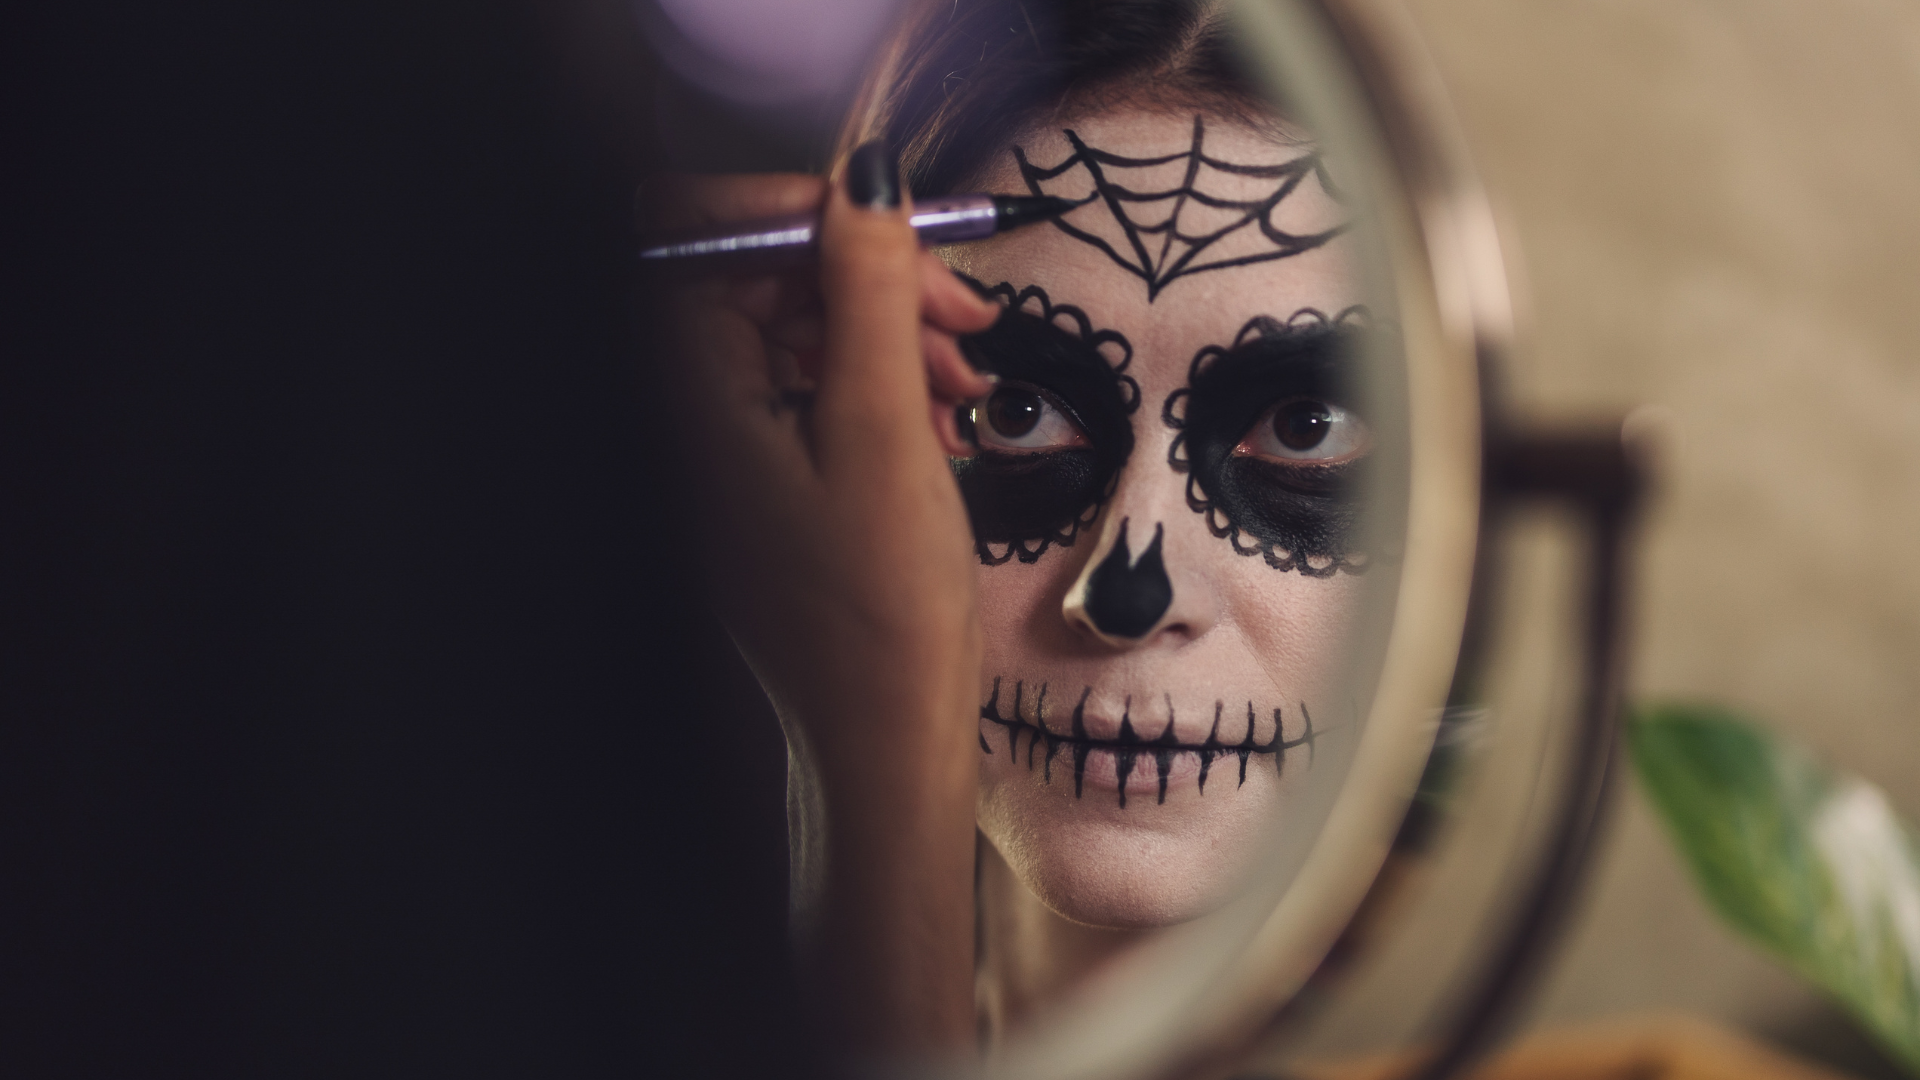 5 Things About Eyebrows That Will Take Your Halloween Costume Game To The Next Level